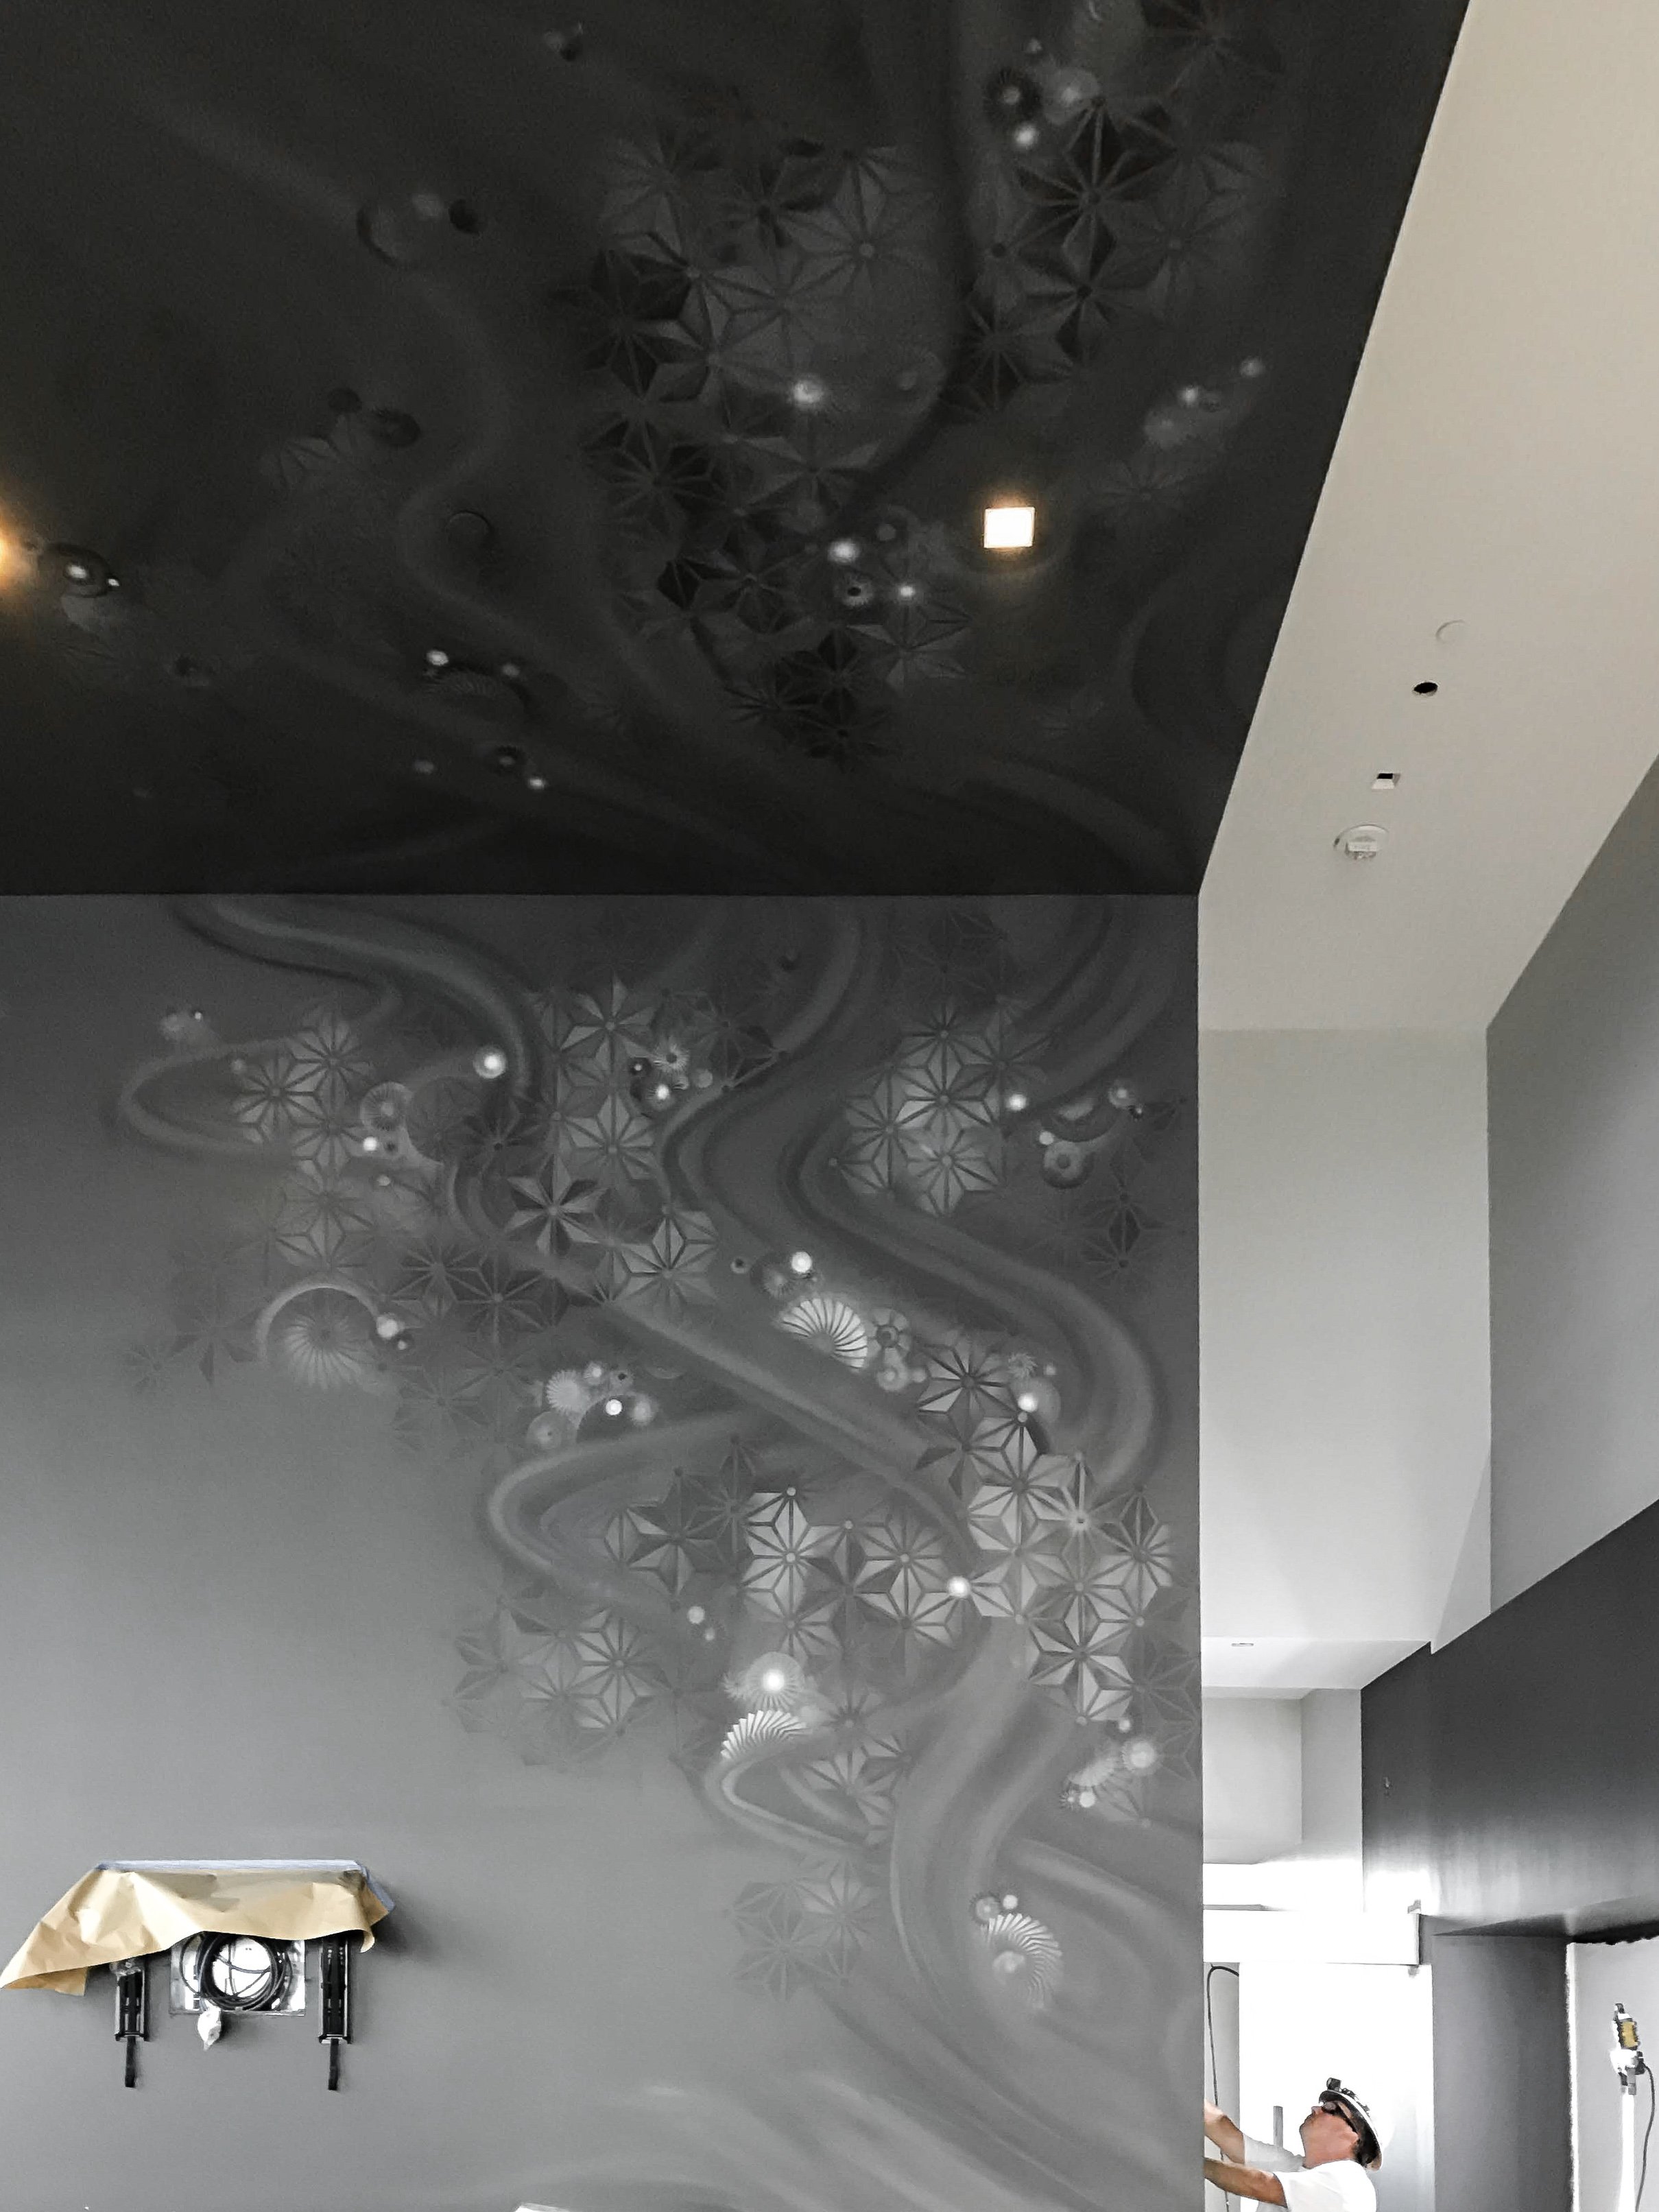 SkB - Product - Art & Collaboration - BCG Kitchen Wall - 6.jpg